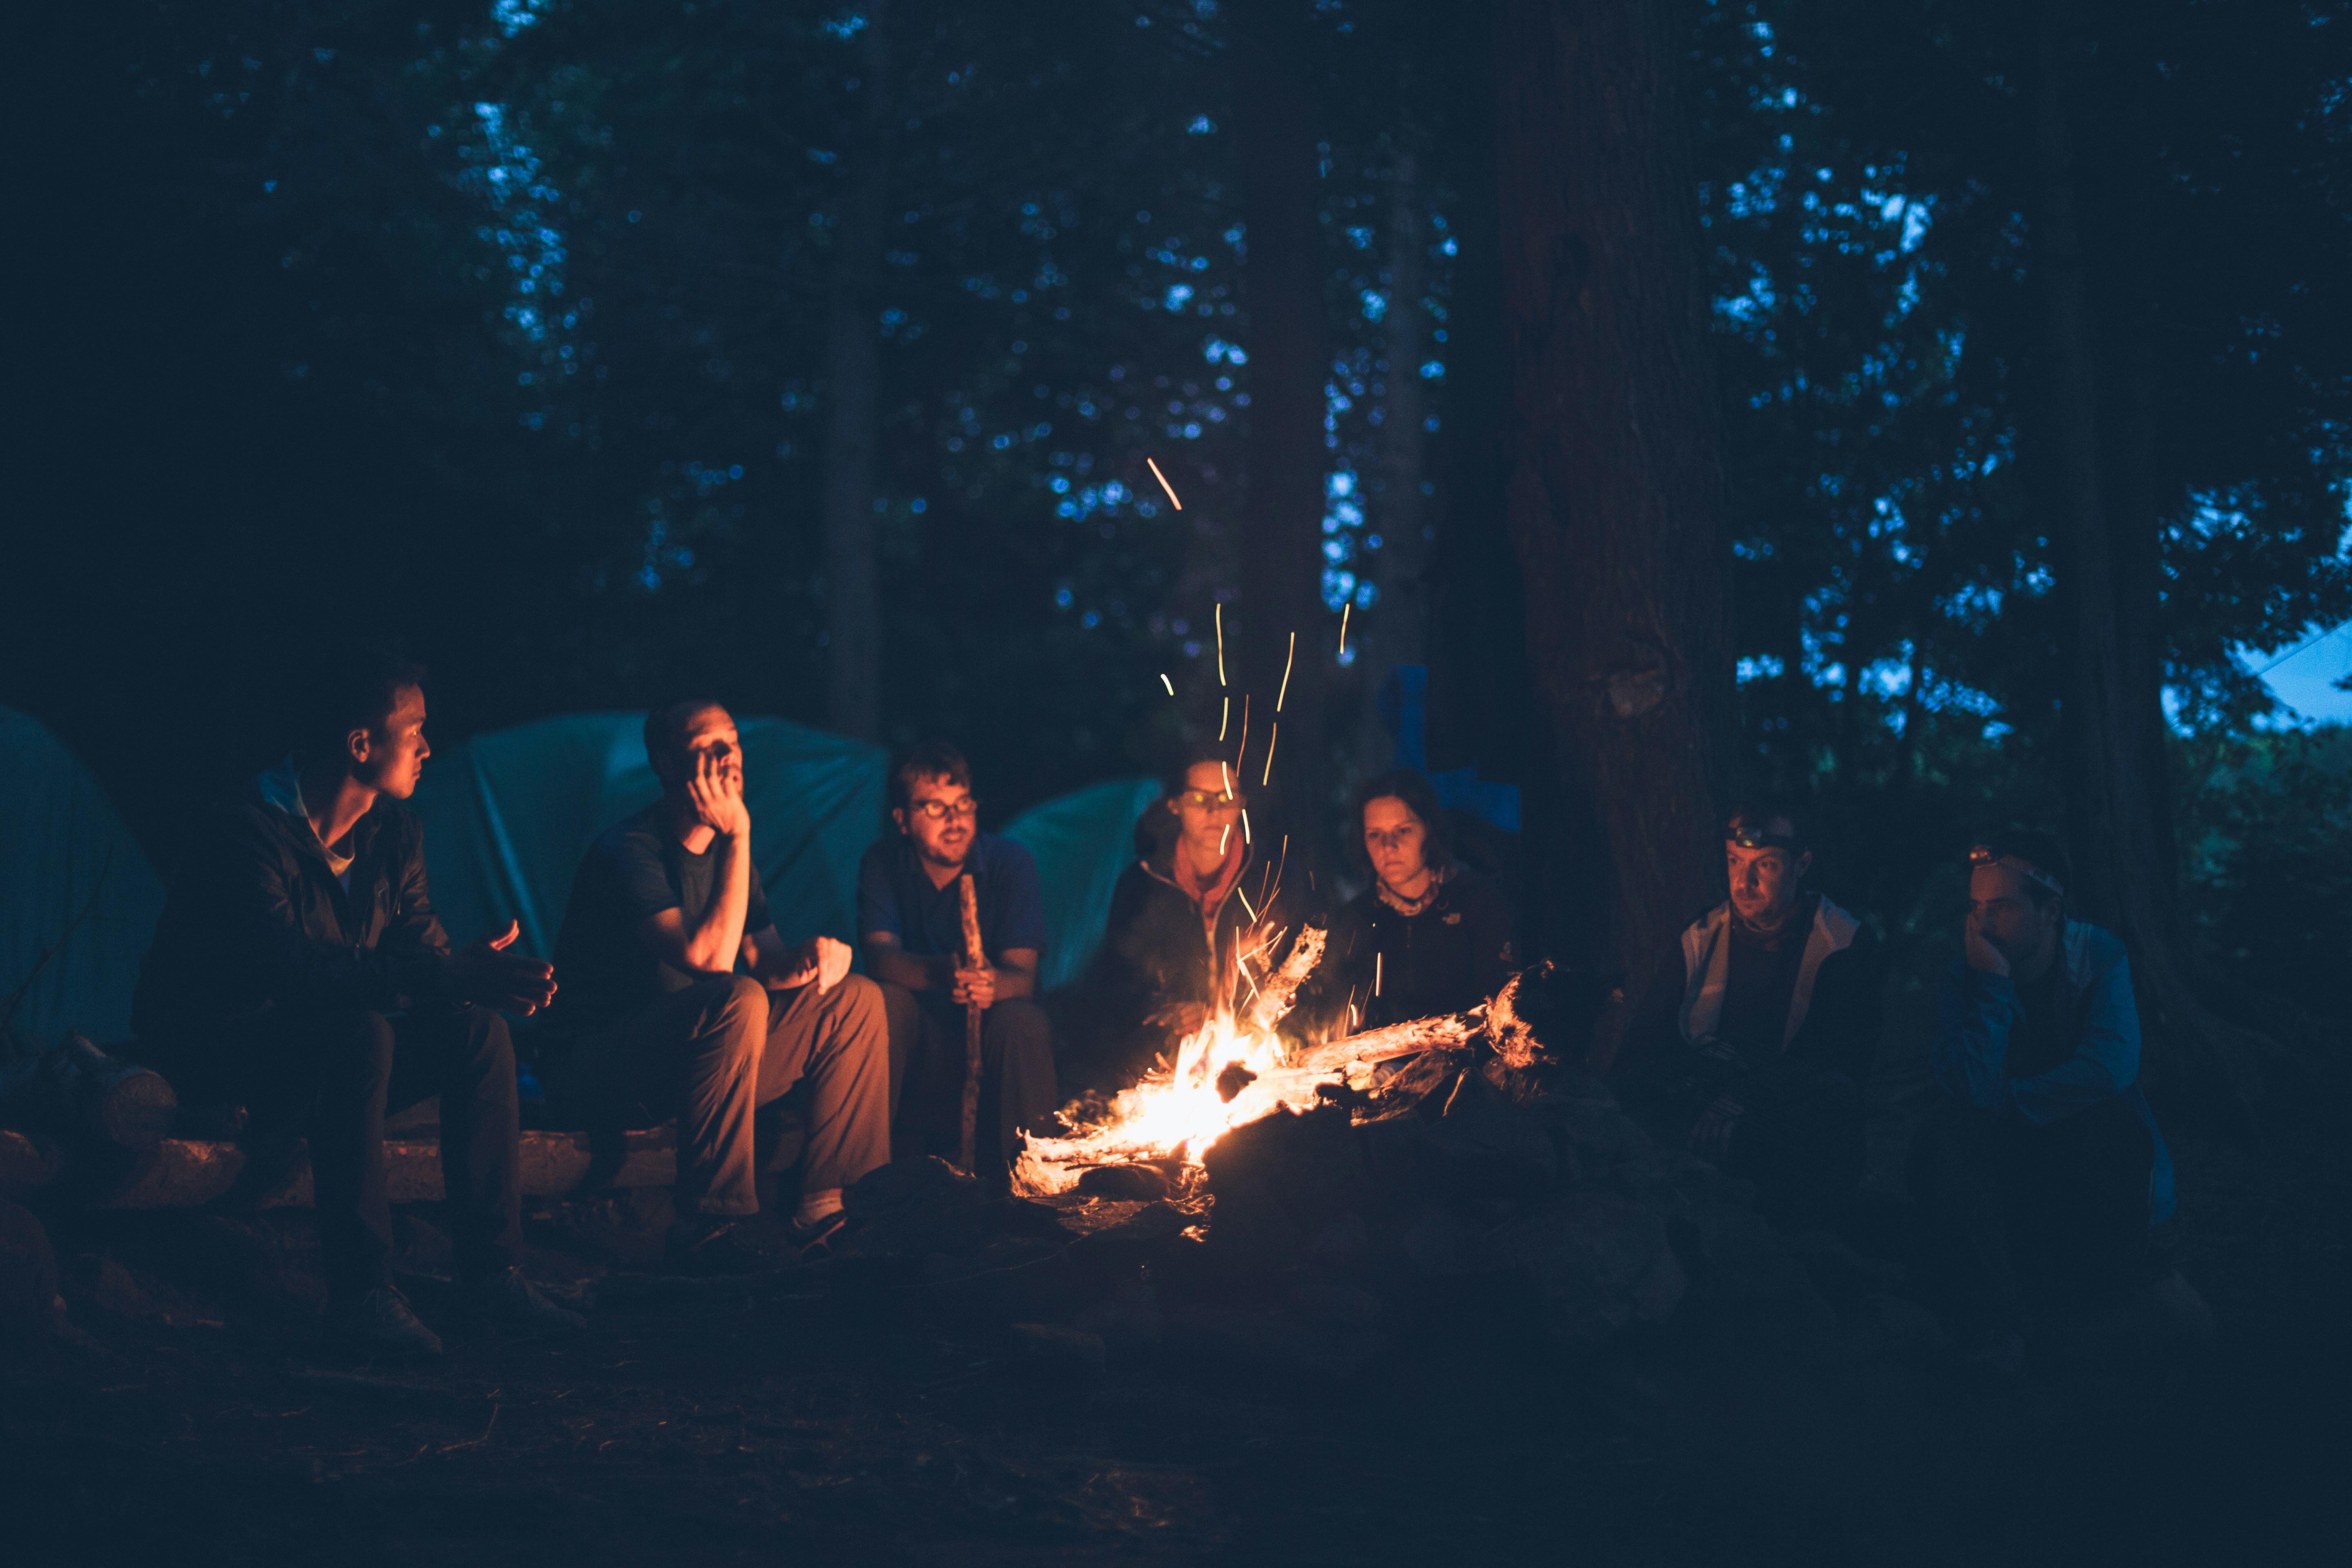 Teenagers sitting around a campfire in the dark